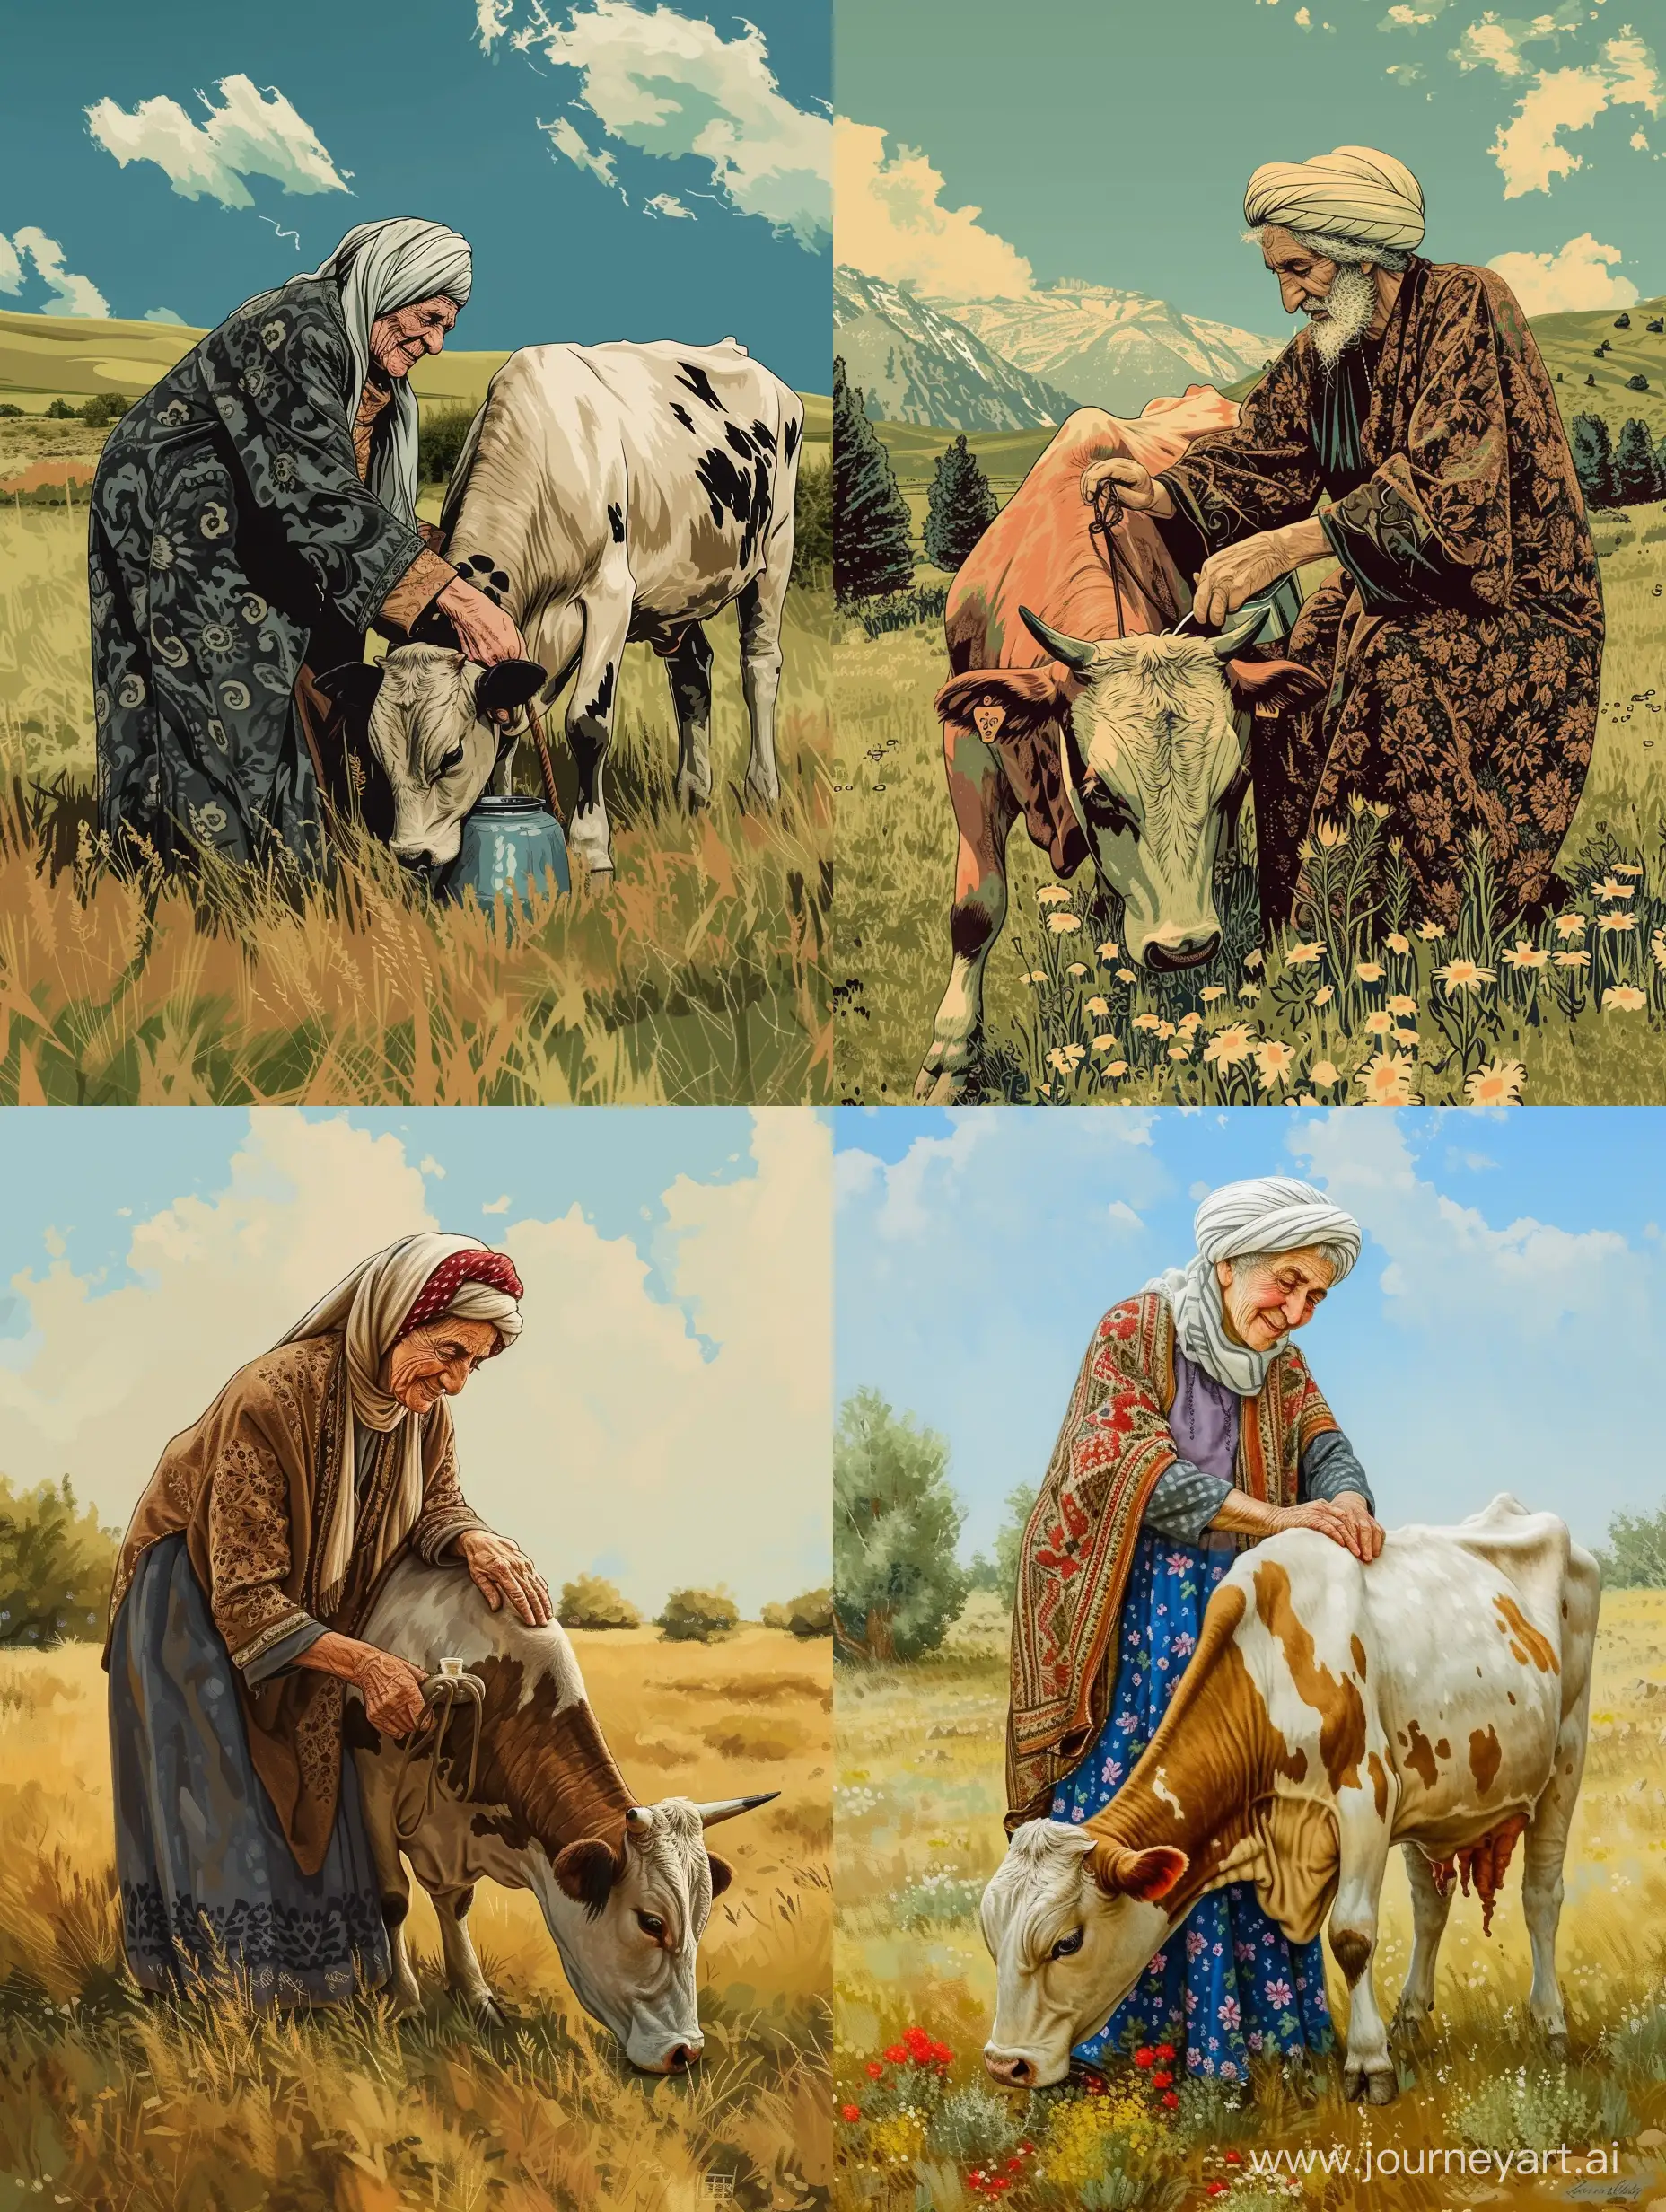 Traditional-Iranian-Woman-Milking-a-Cow-in-a-Field-Vintage-Style-Illustration